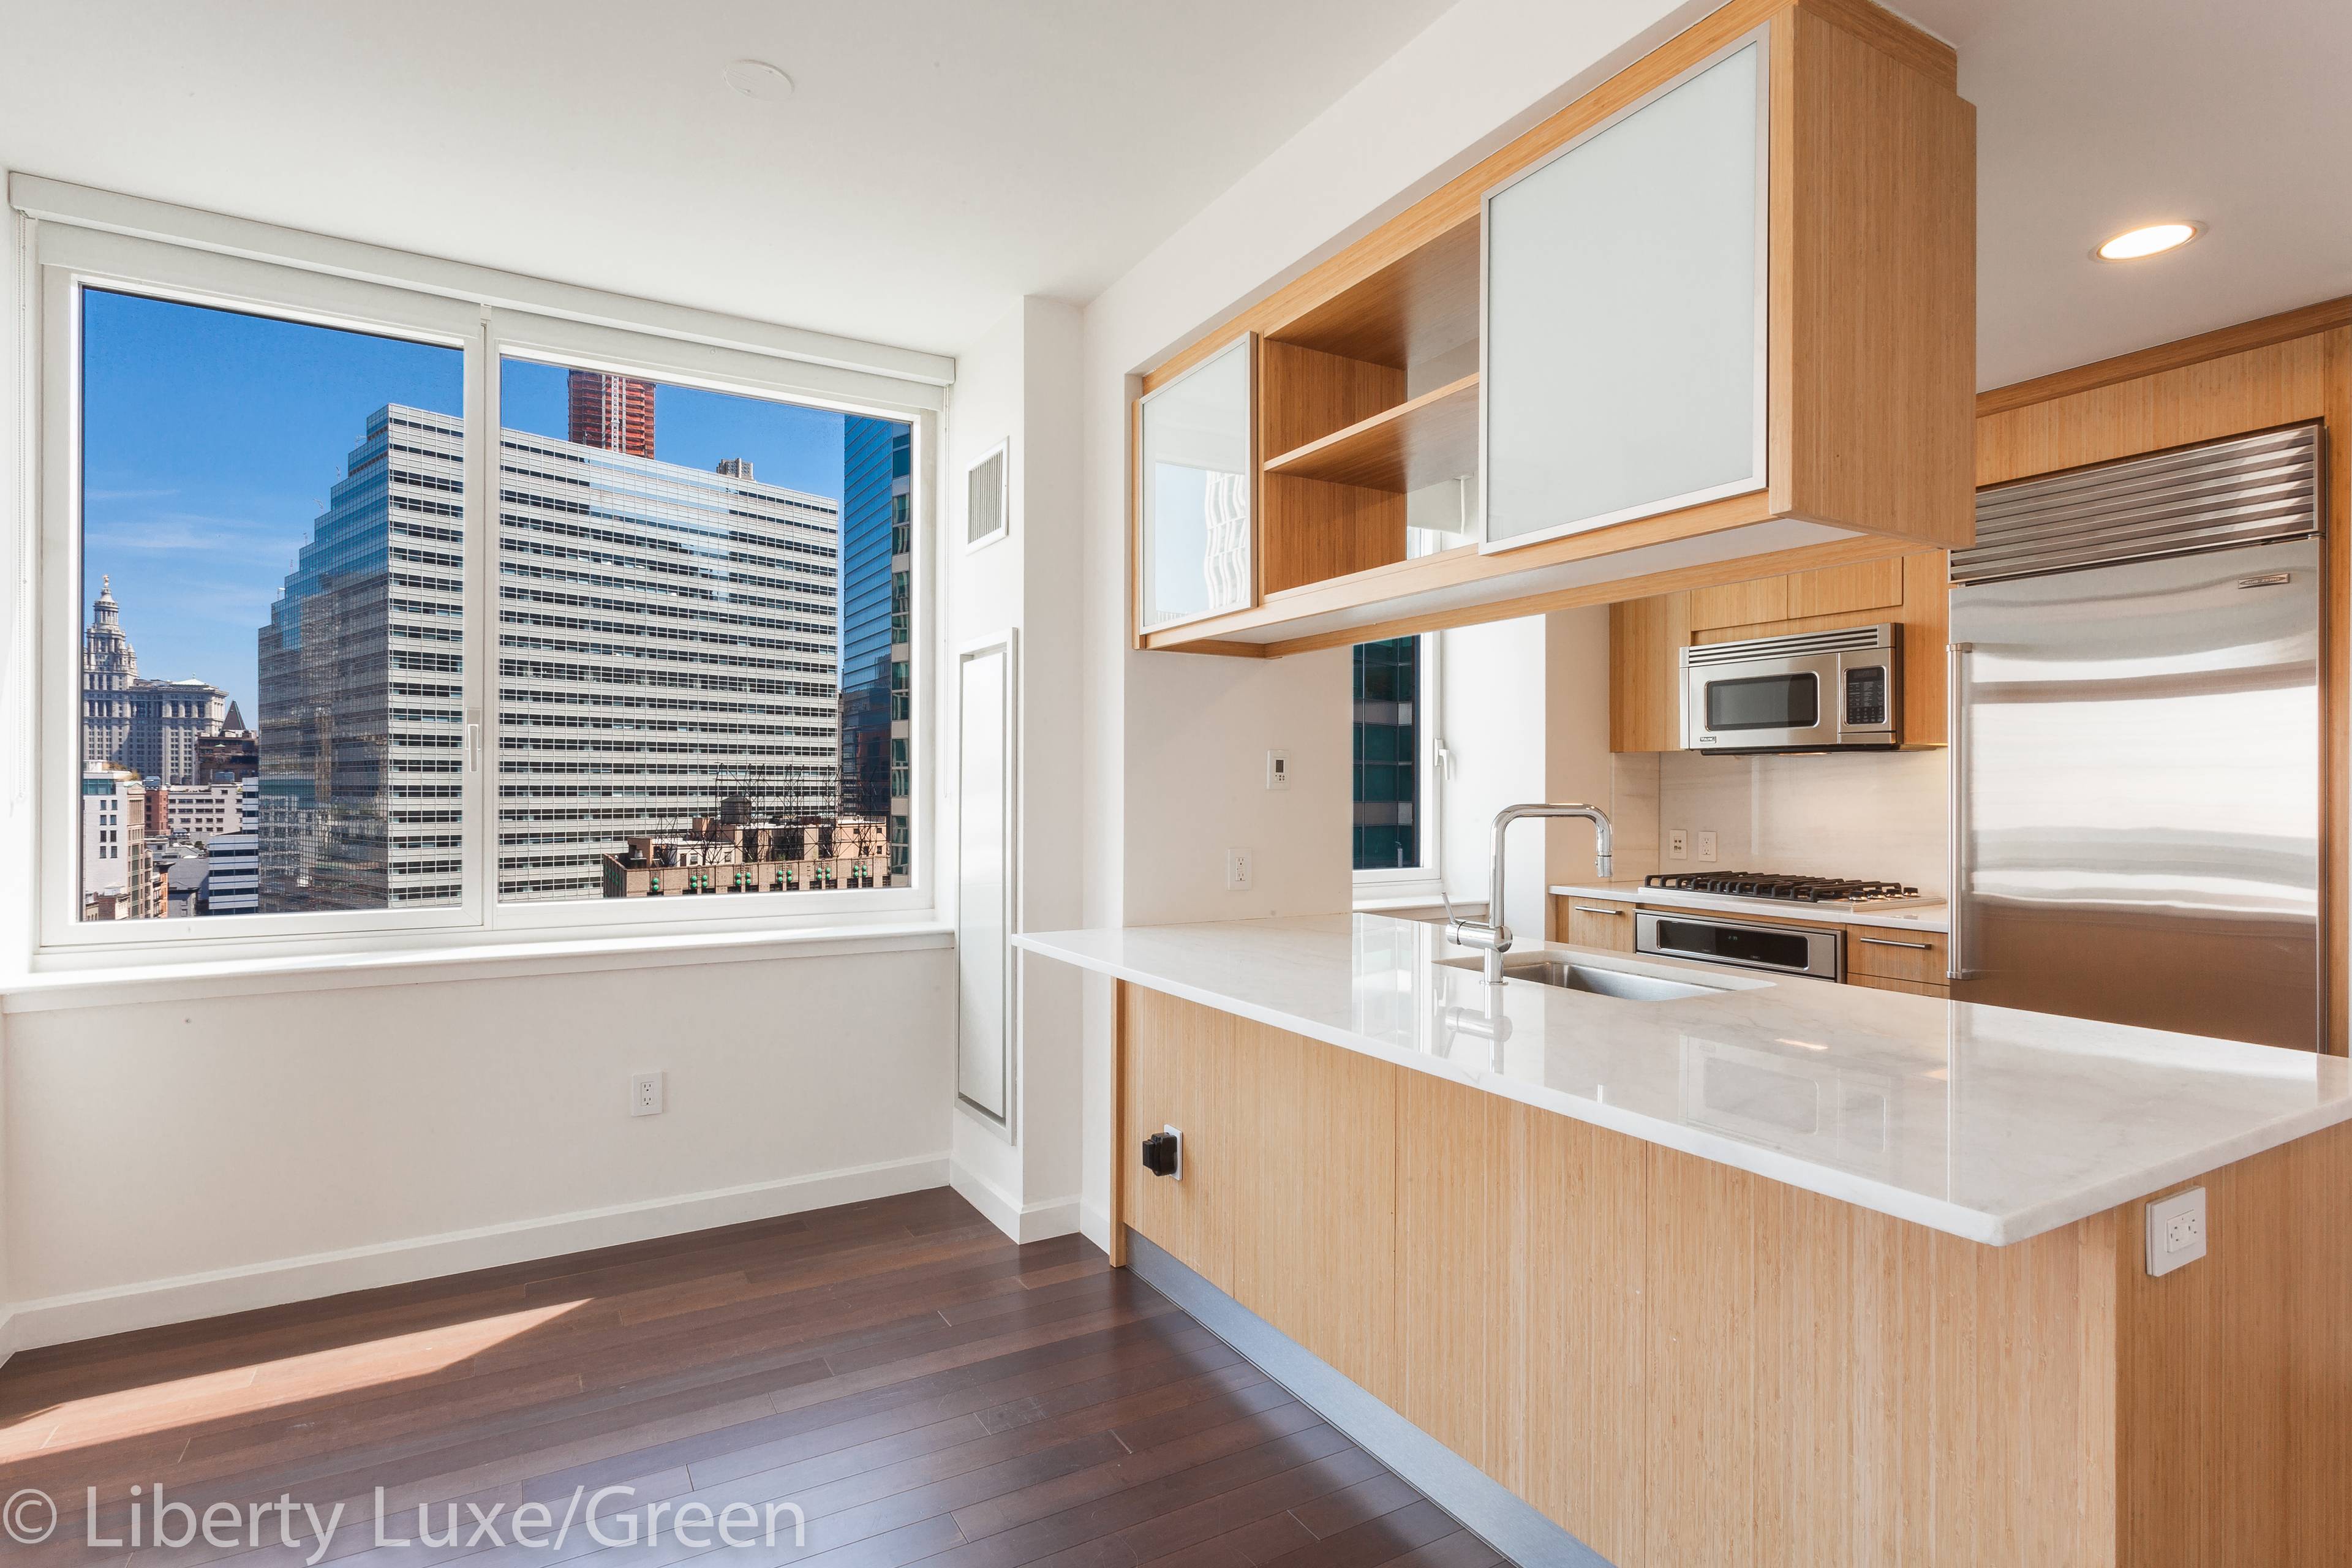 2BR/2BA IN A LUXURIOUS BATTERY PARK CITY APARTMENT